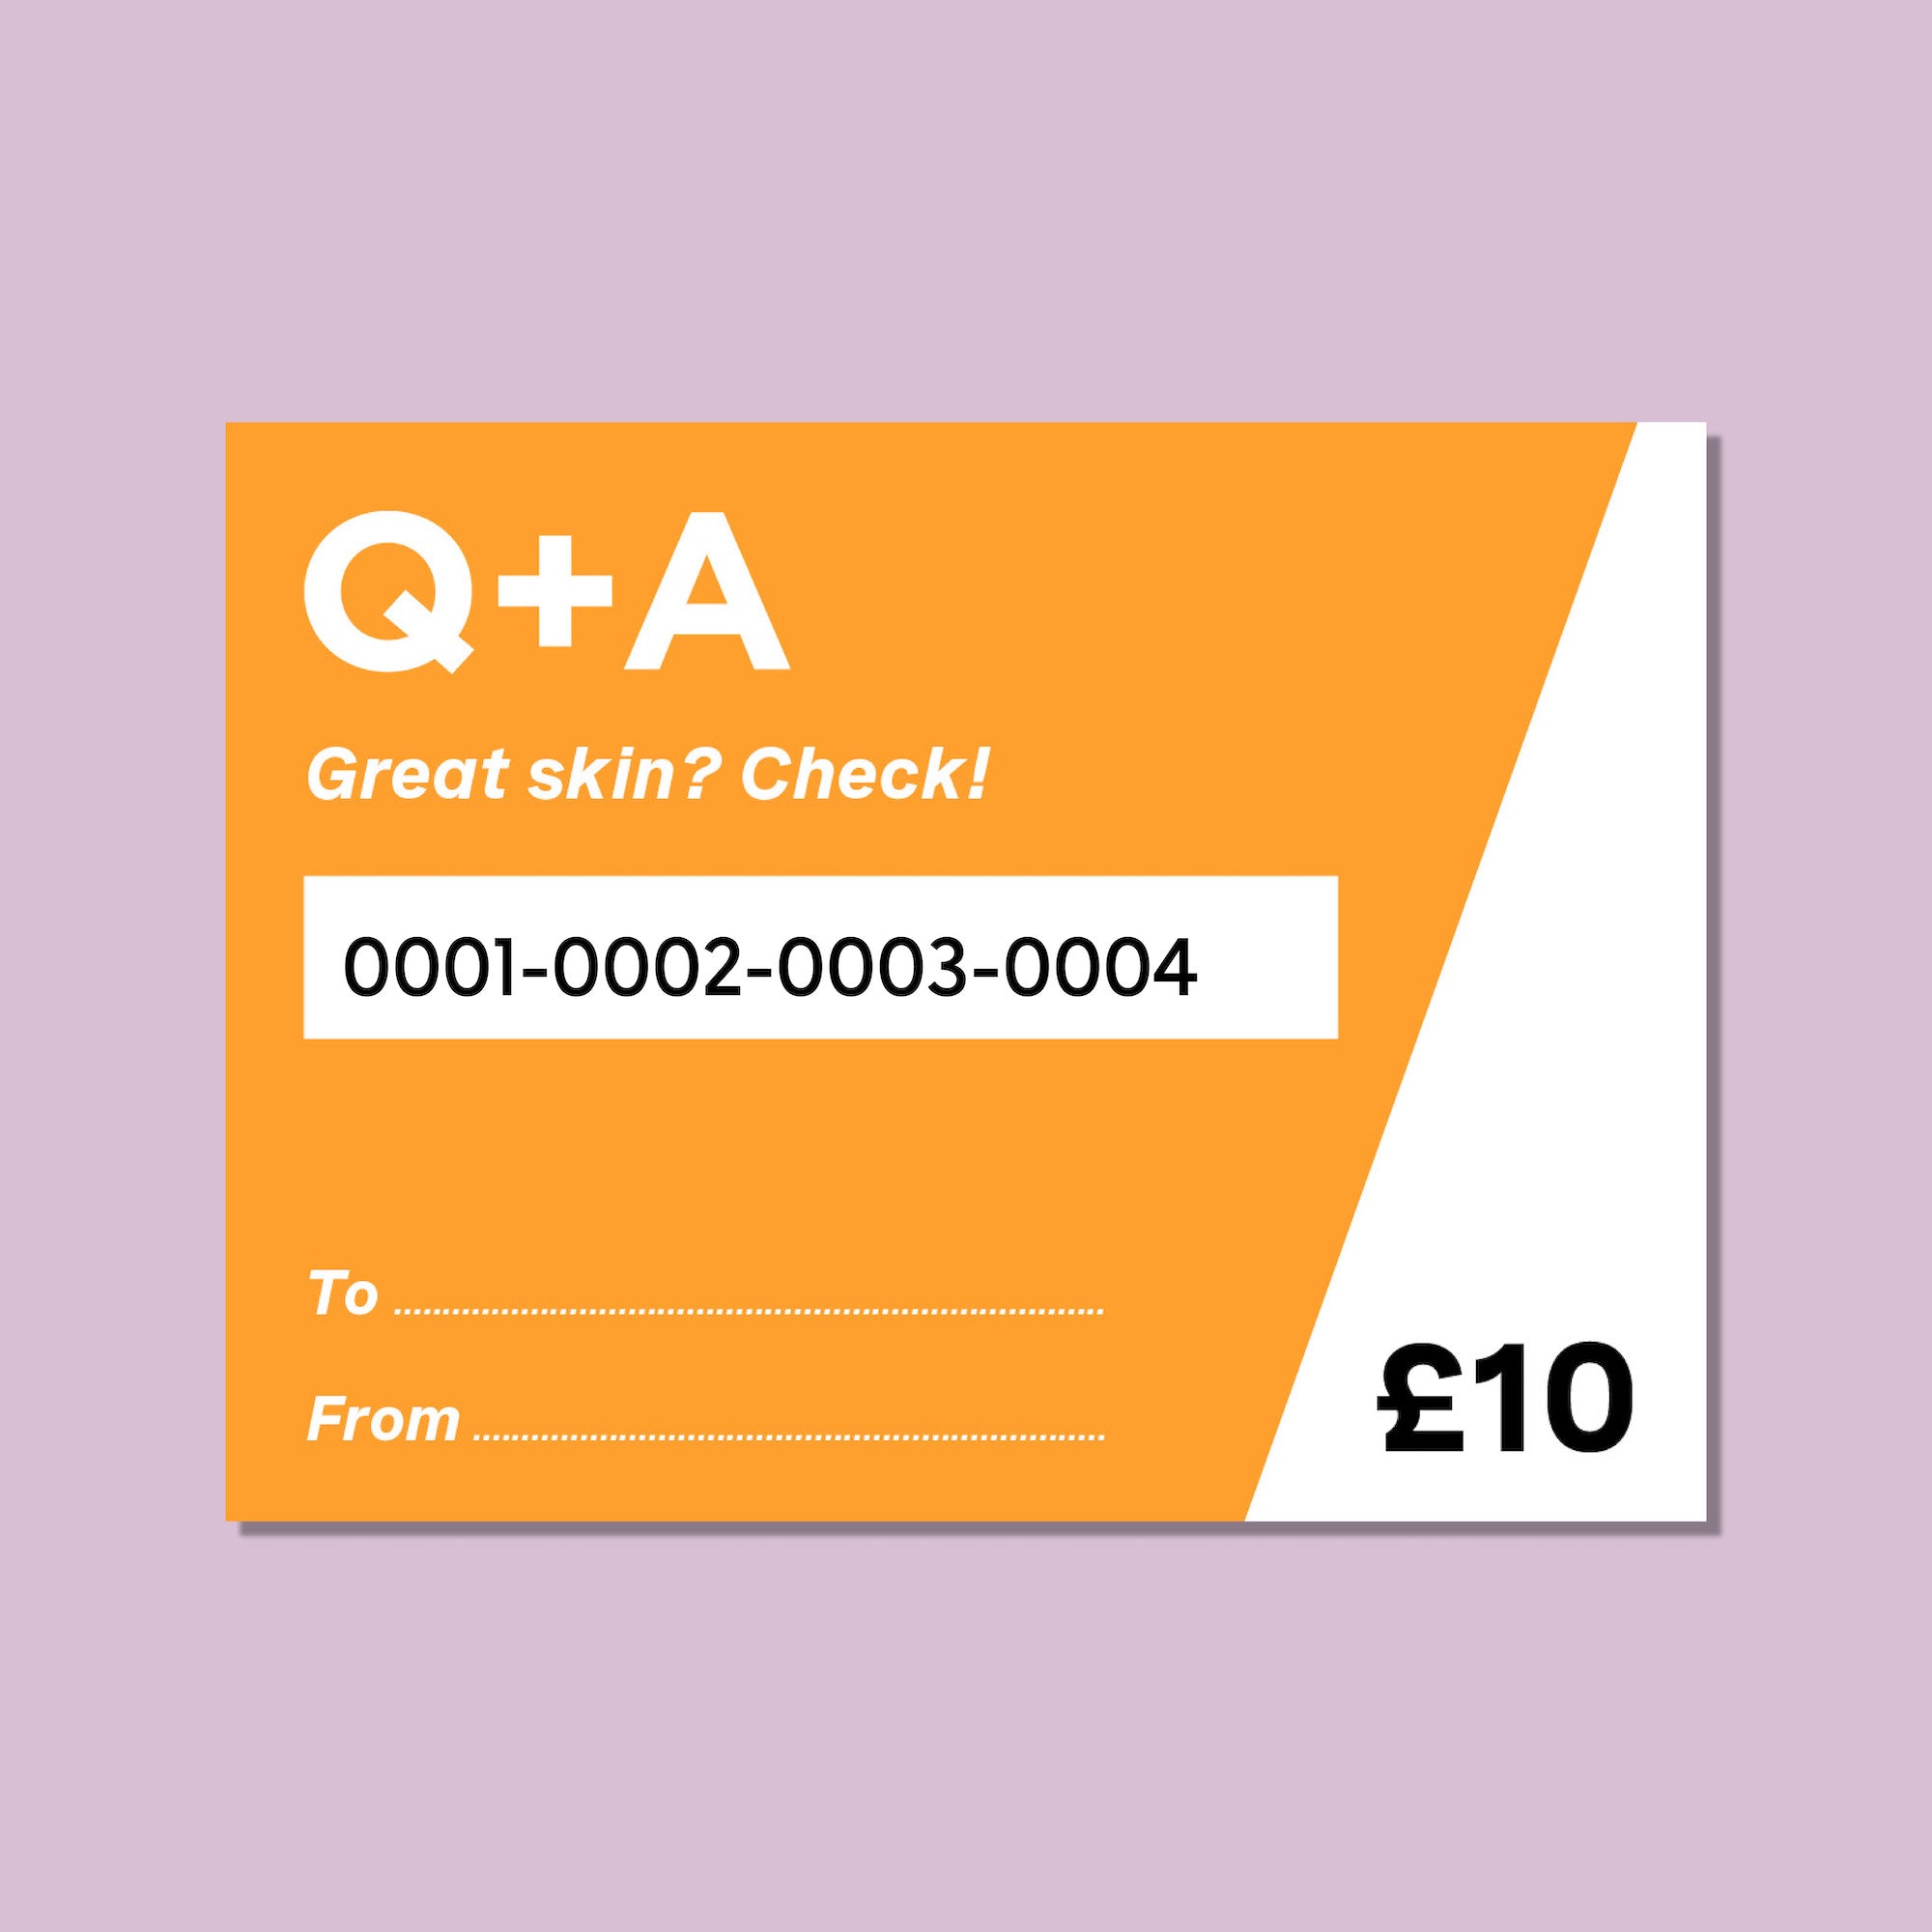 Q+A £10 giftcard